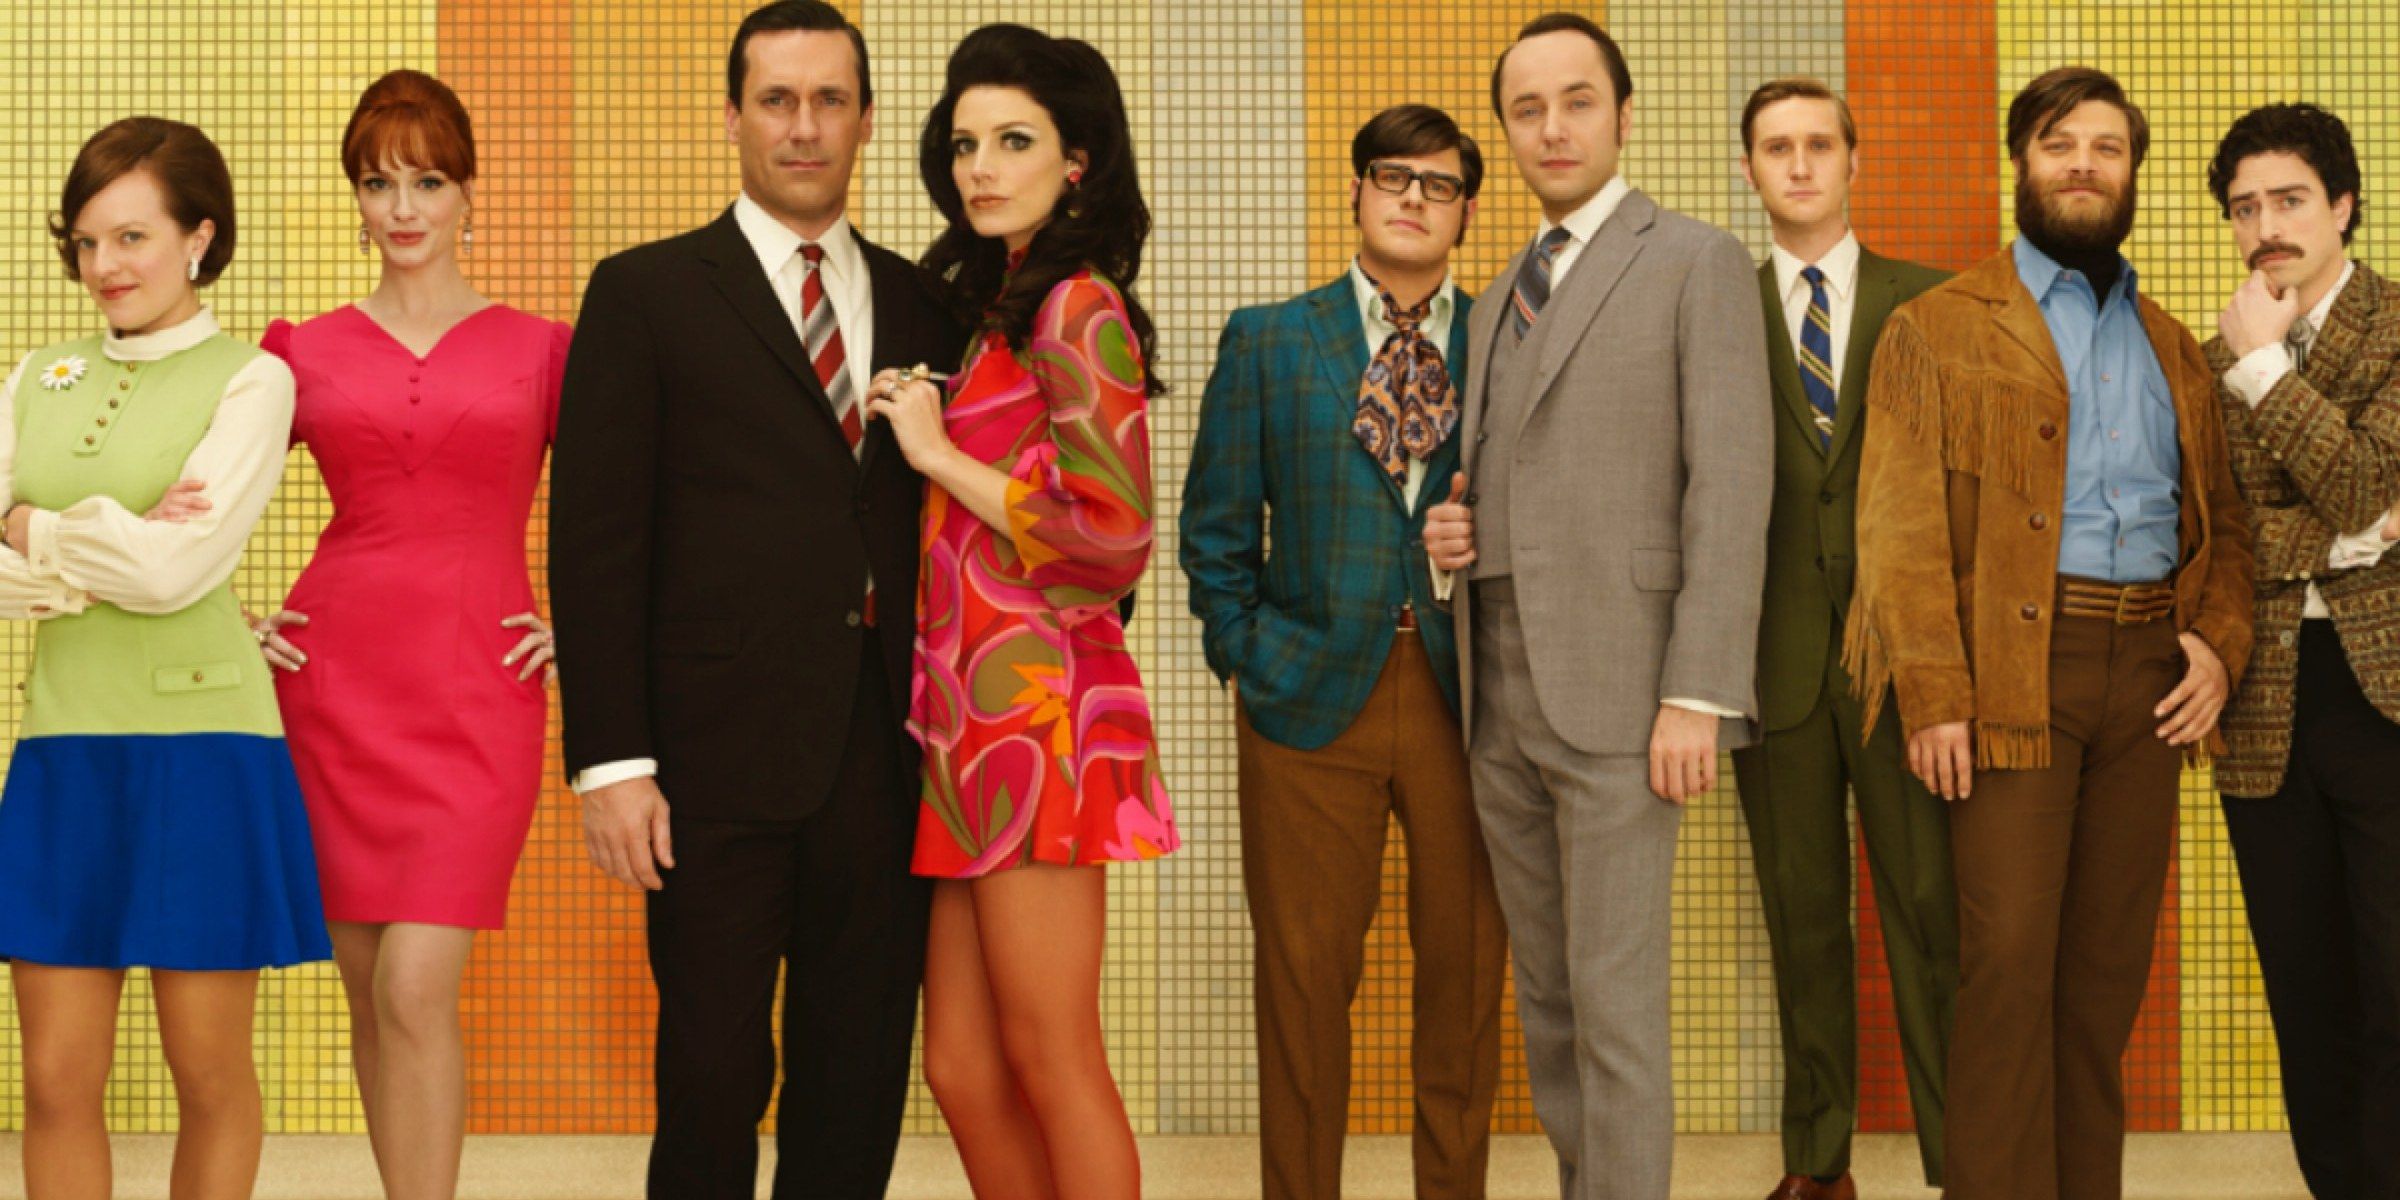 Mad Men 10 Hidden Details About The Main Characters Everyone Missed